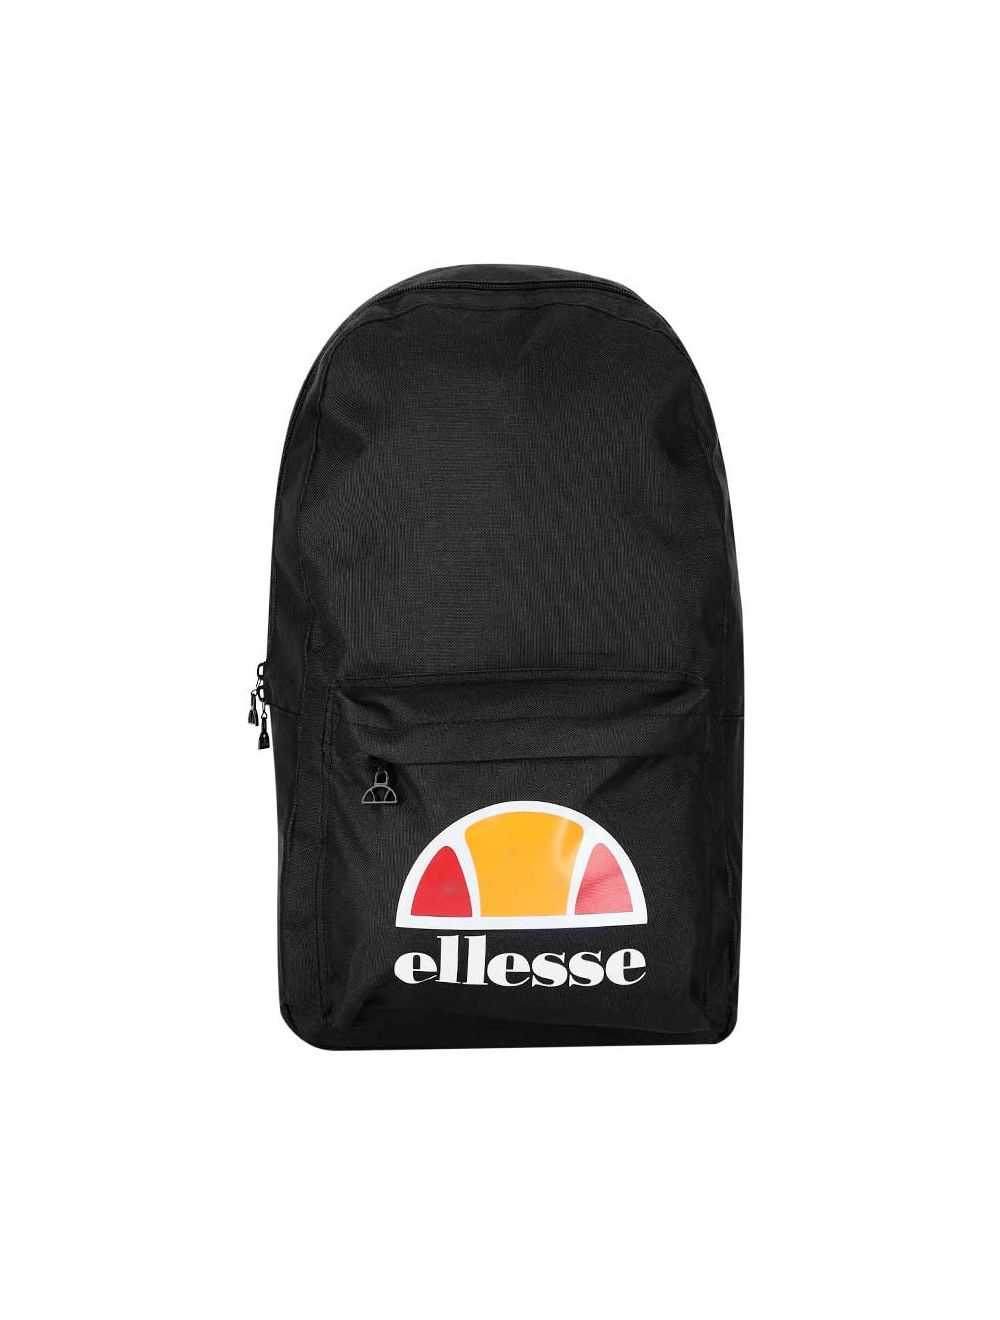 We worked with Ellesse Brand to bring a World Exclusive 'Black